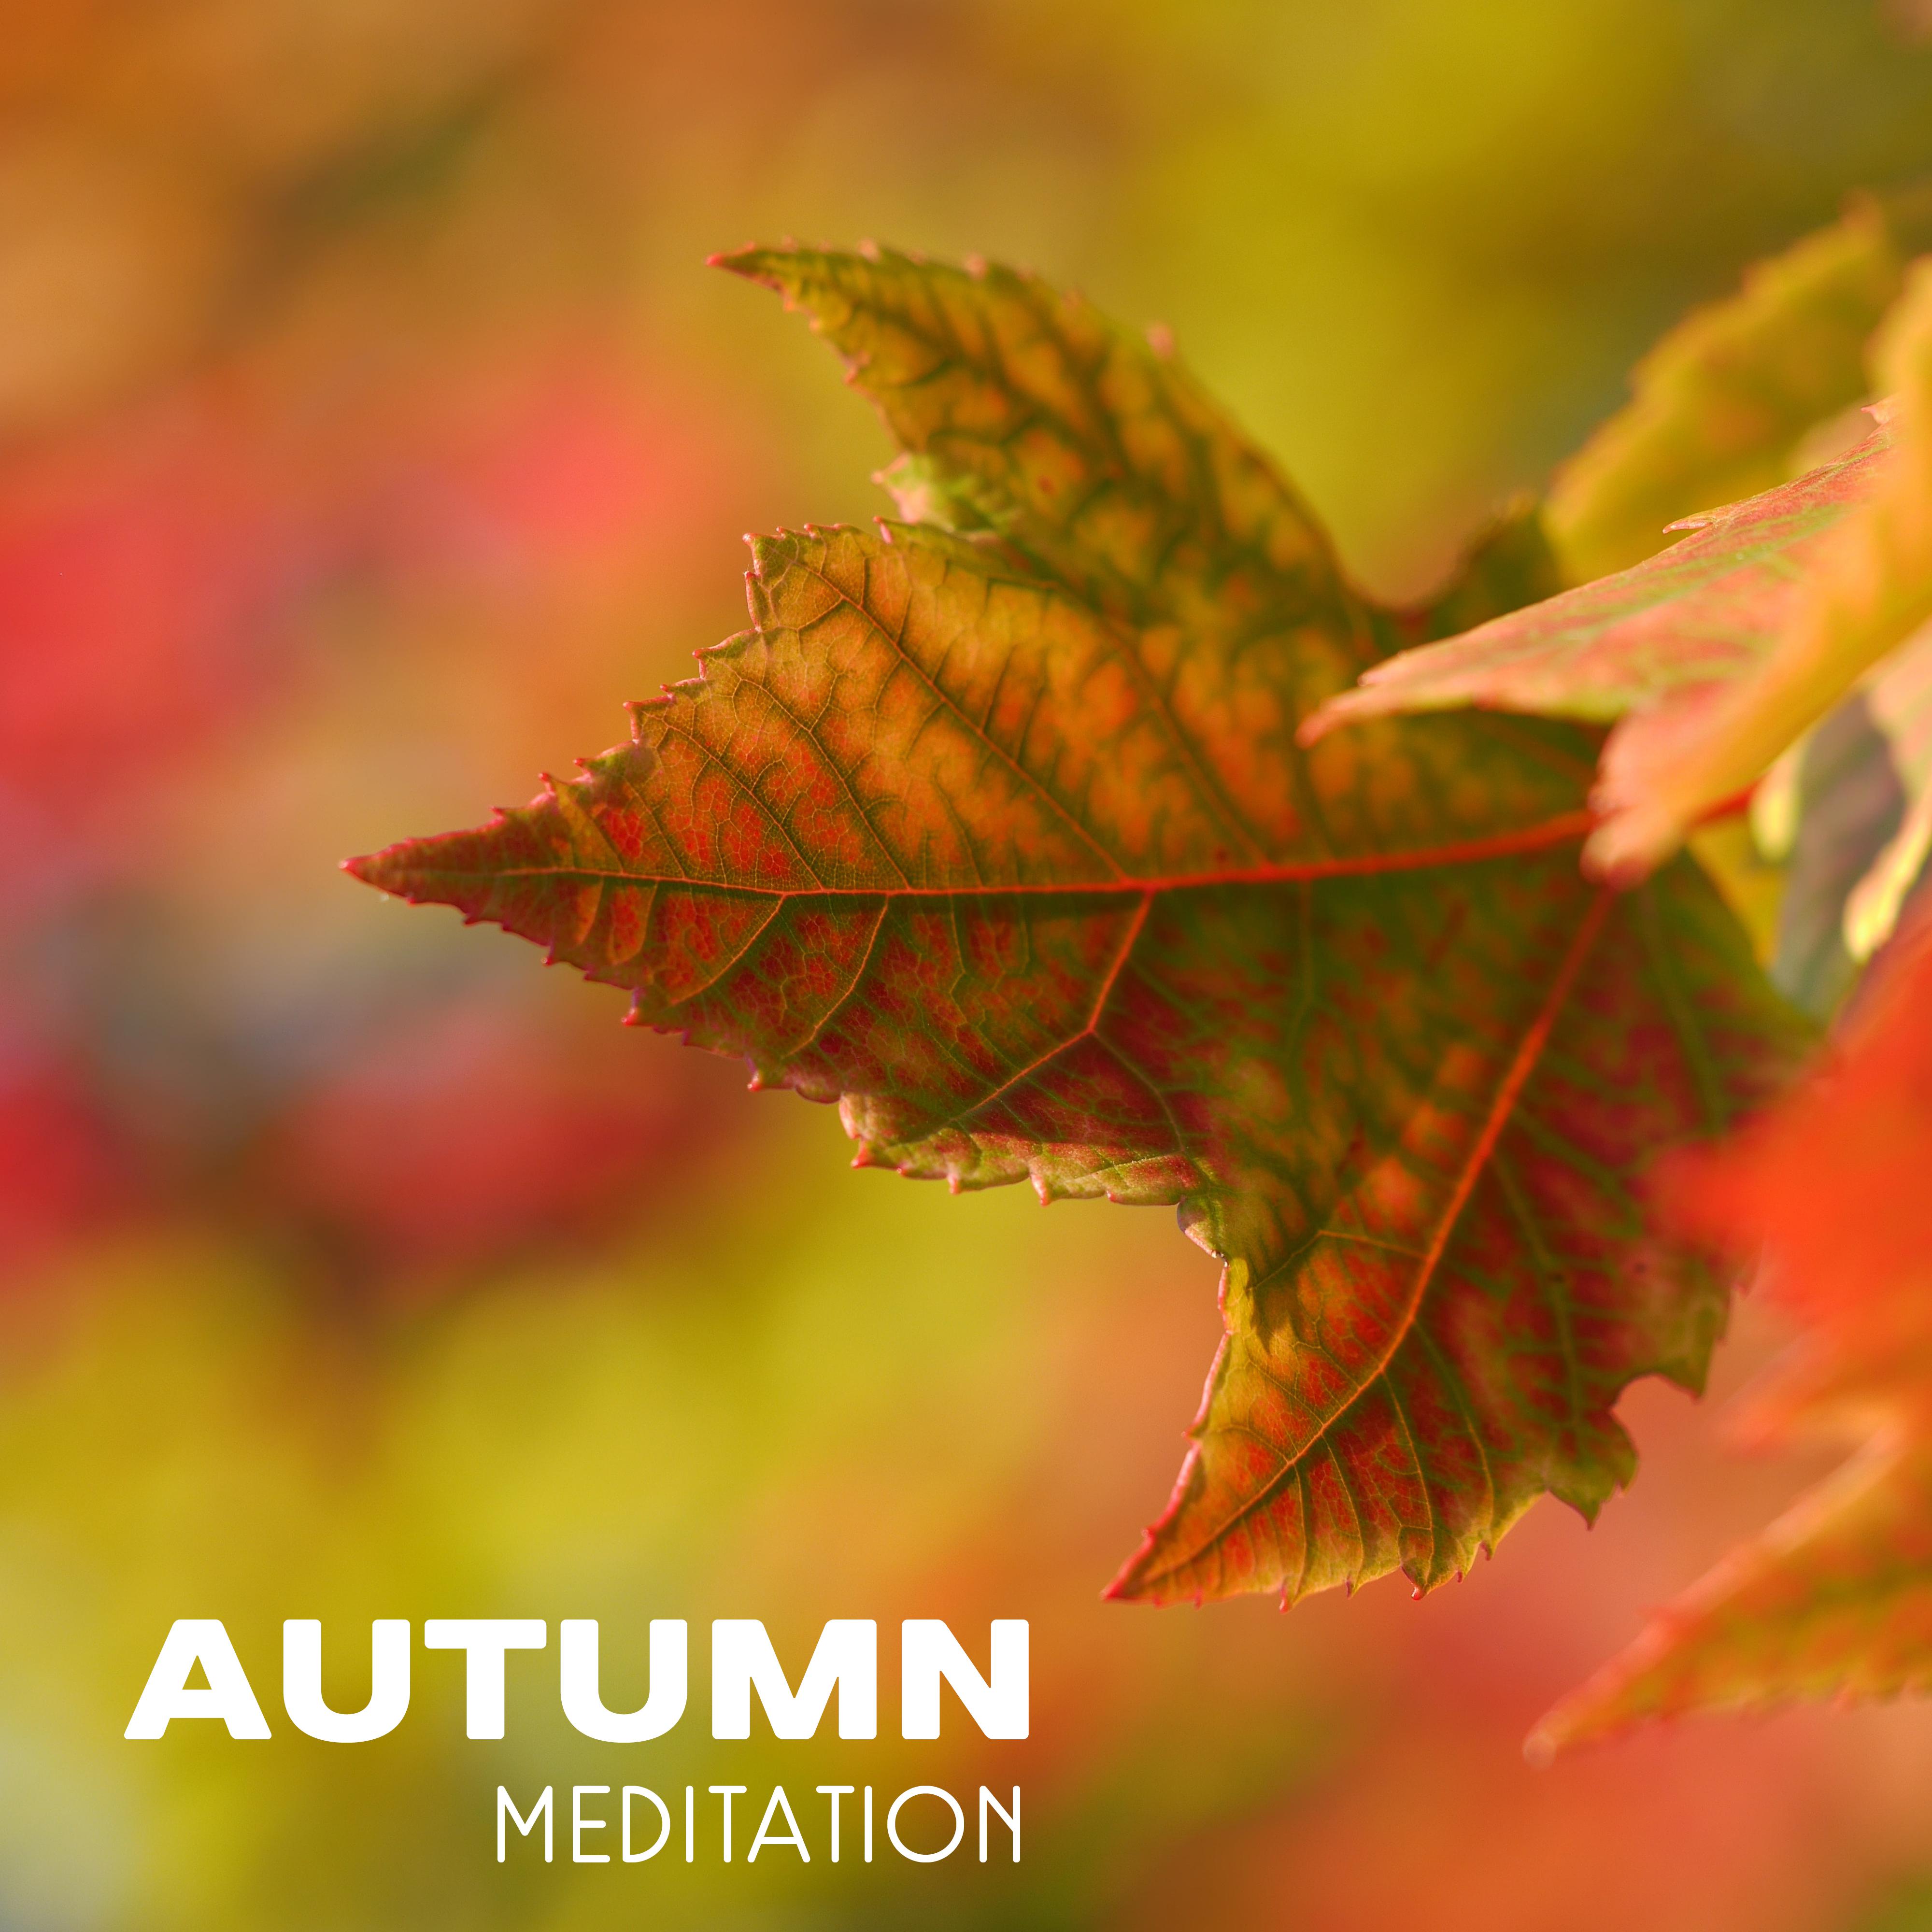 Autumn Meditation  Music for Yoga, Meditaion, Mantra, Mindfulness Training, Relaxation with Nature Sounds